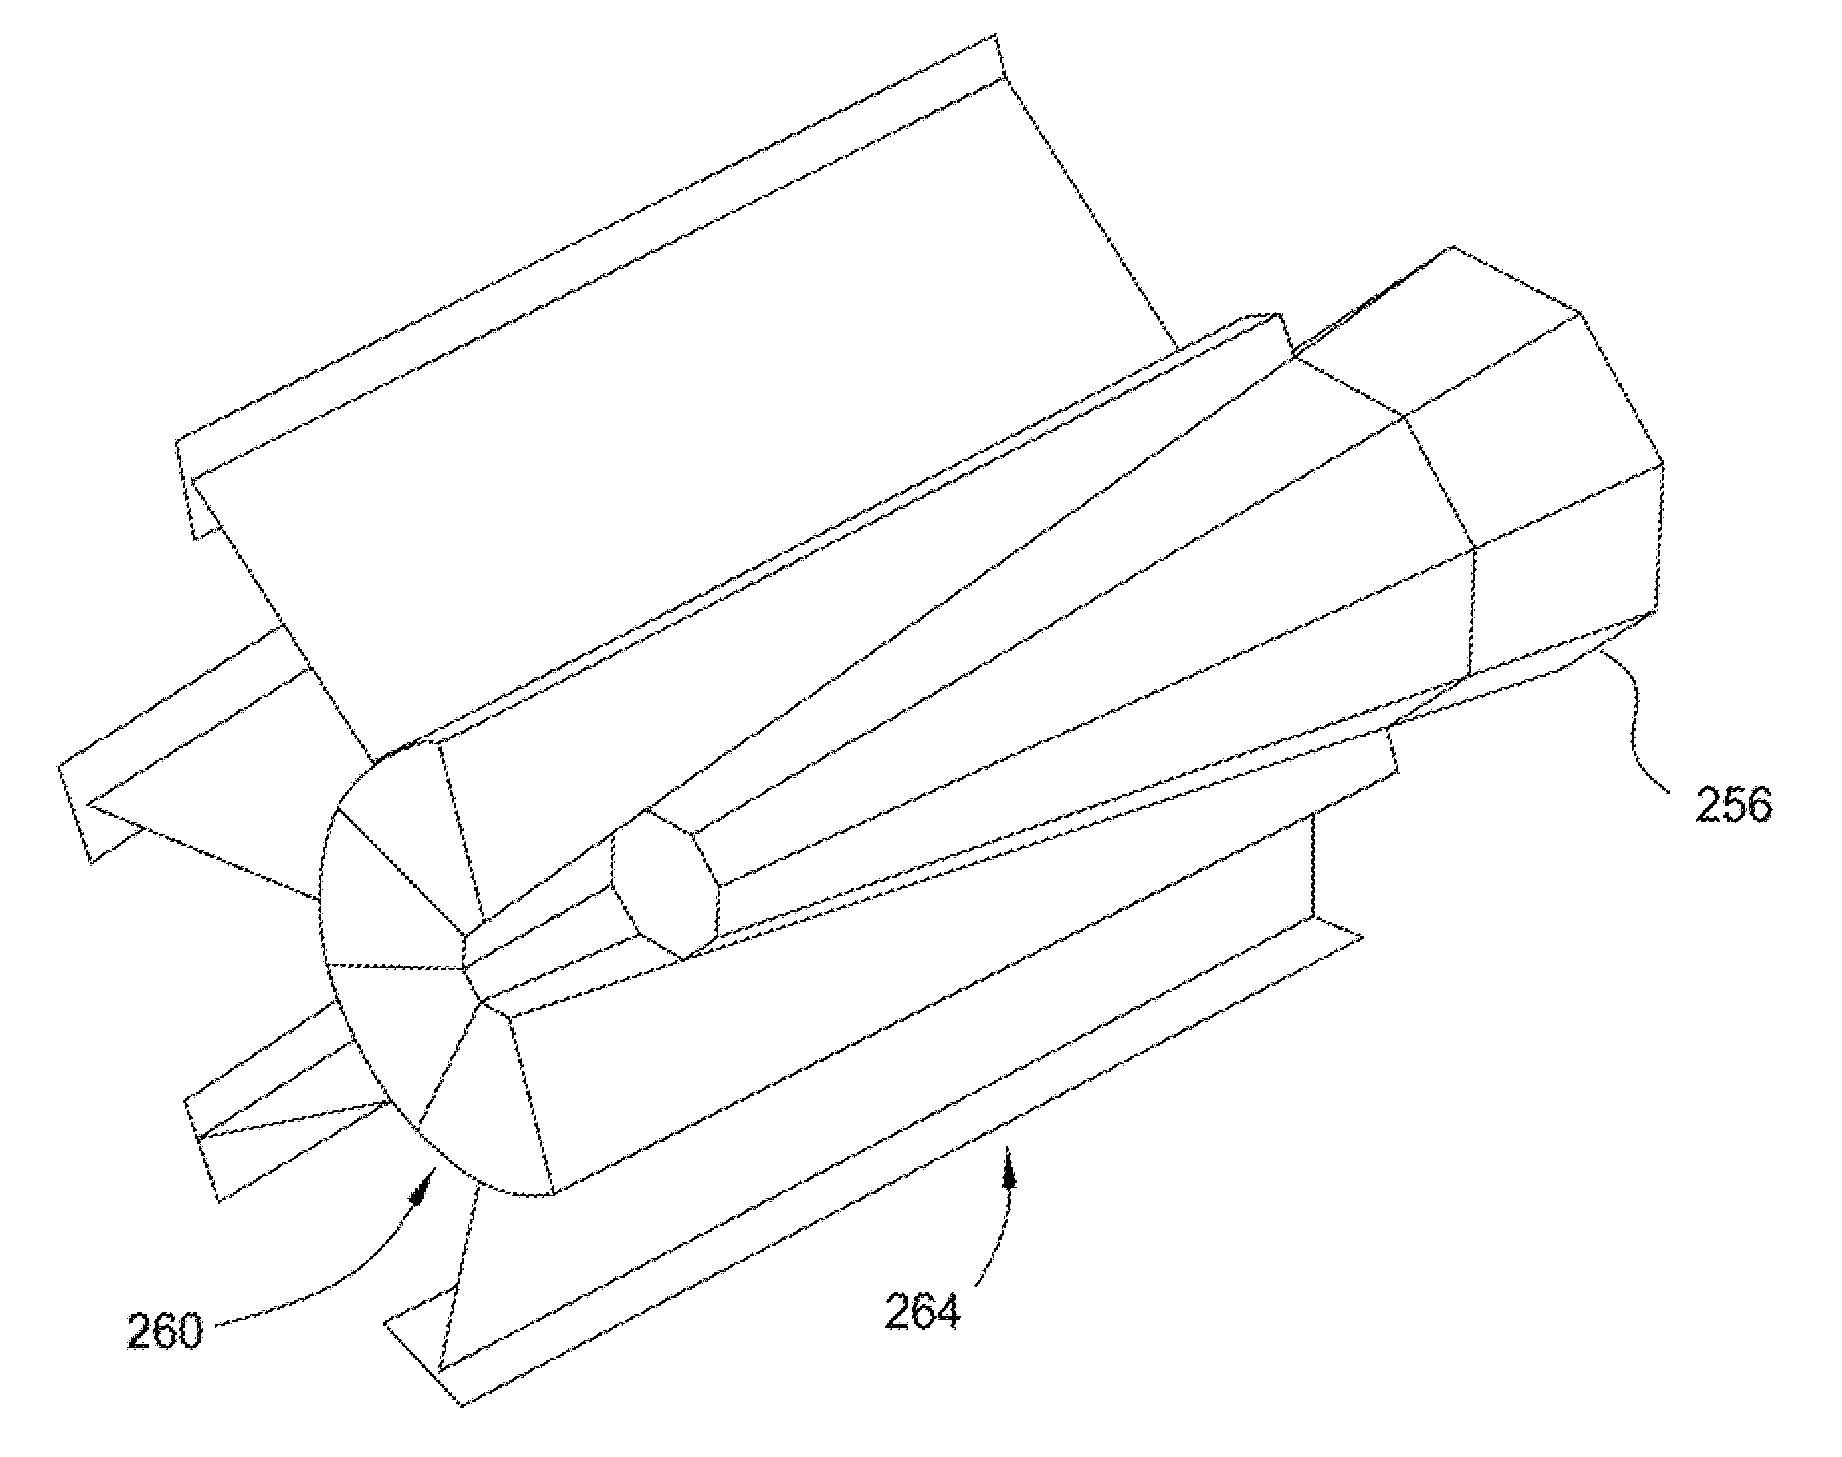 Integrated high thermal conductive fiber as cooling fin for sma actuator with expandable sleeve